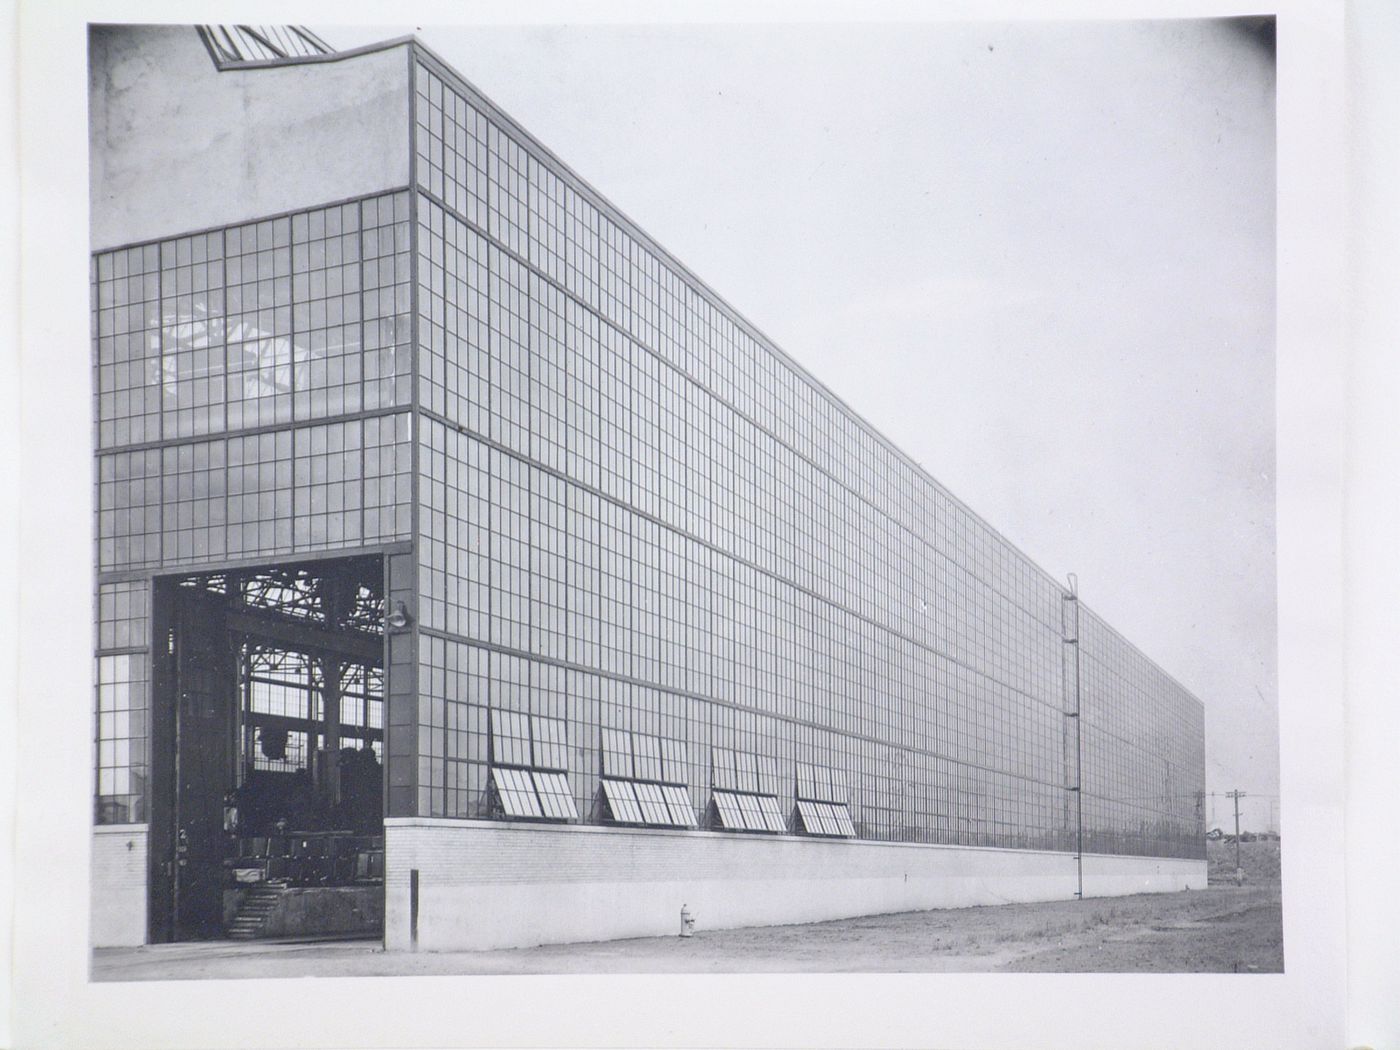 View of the principal and lateral façades of the Assembly [?] Building, General Motors Corporation Chevrolet division Commercial Body Assembly Plant, Indianapolis, Indiana